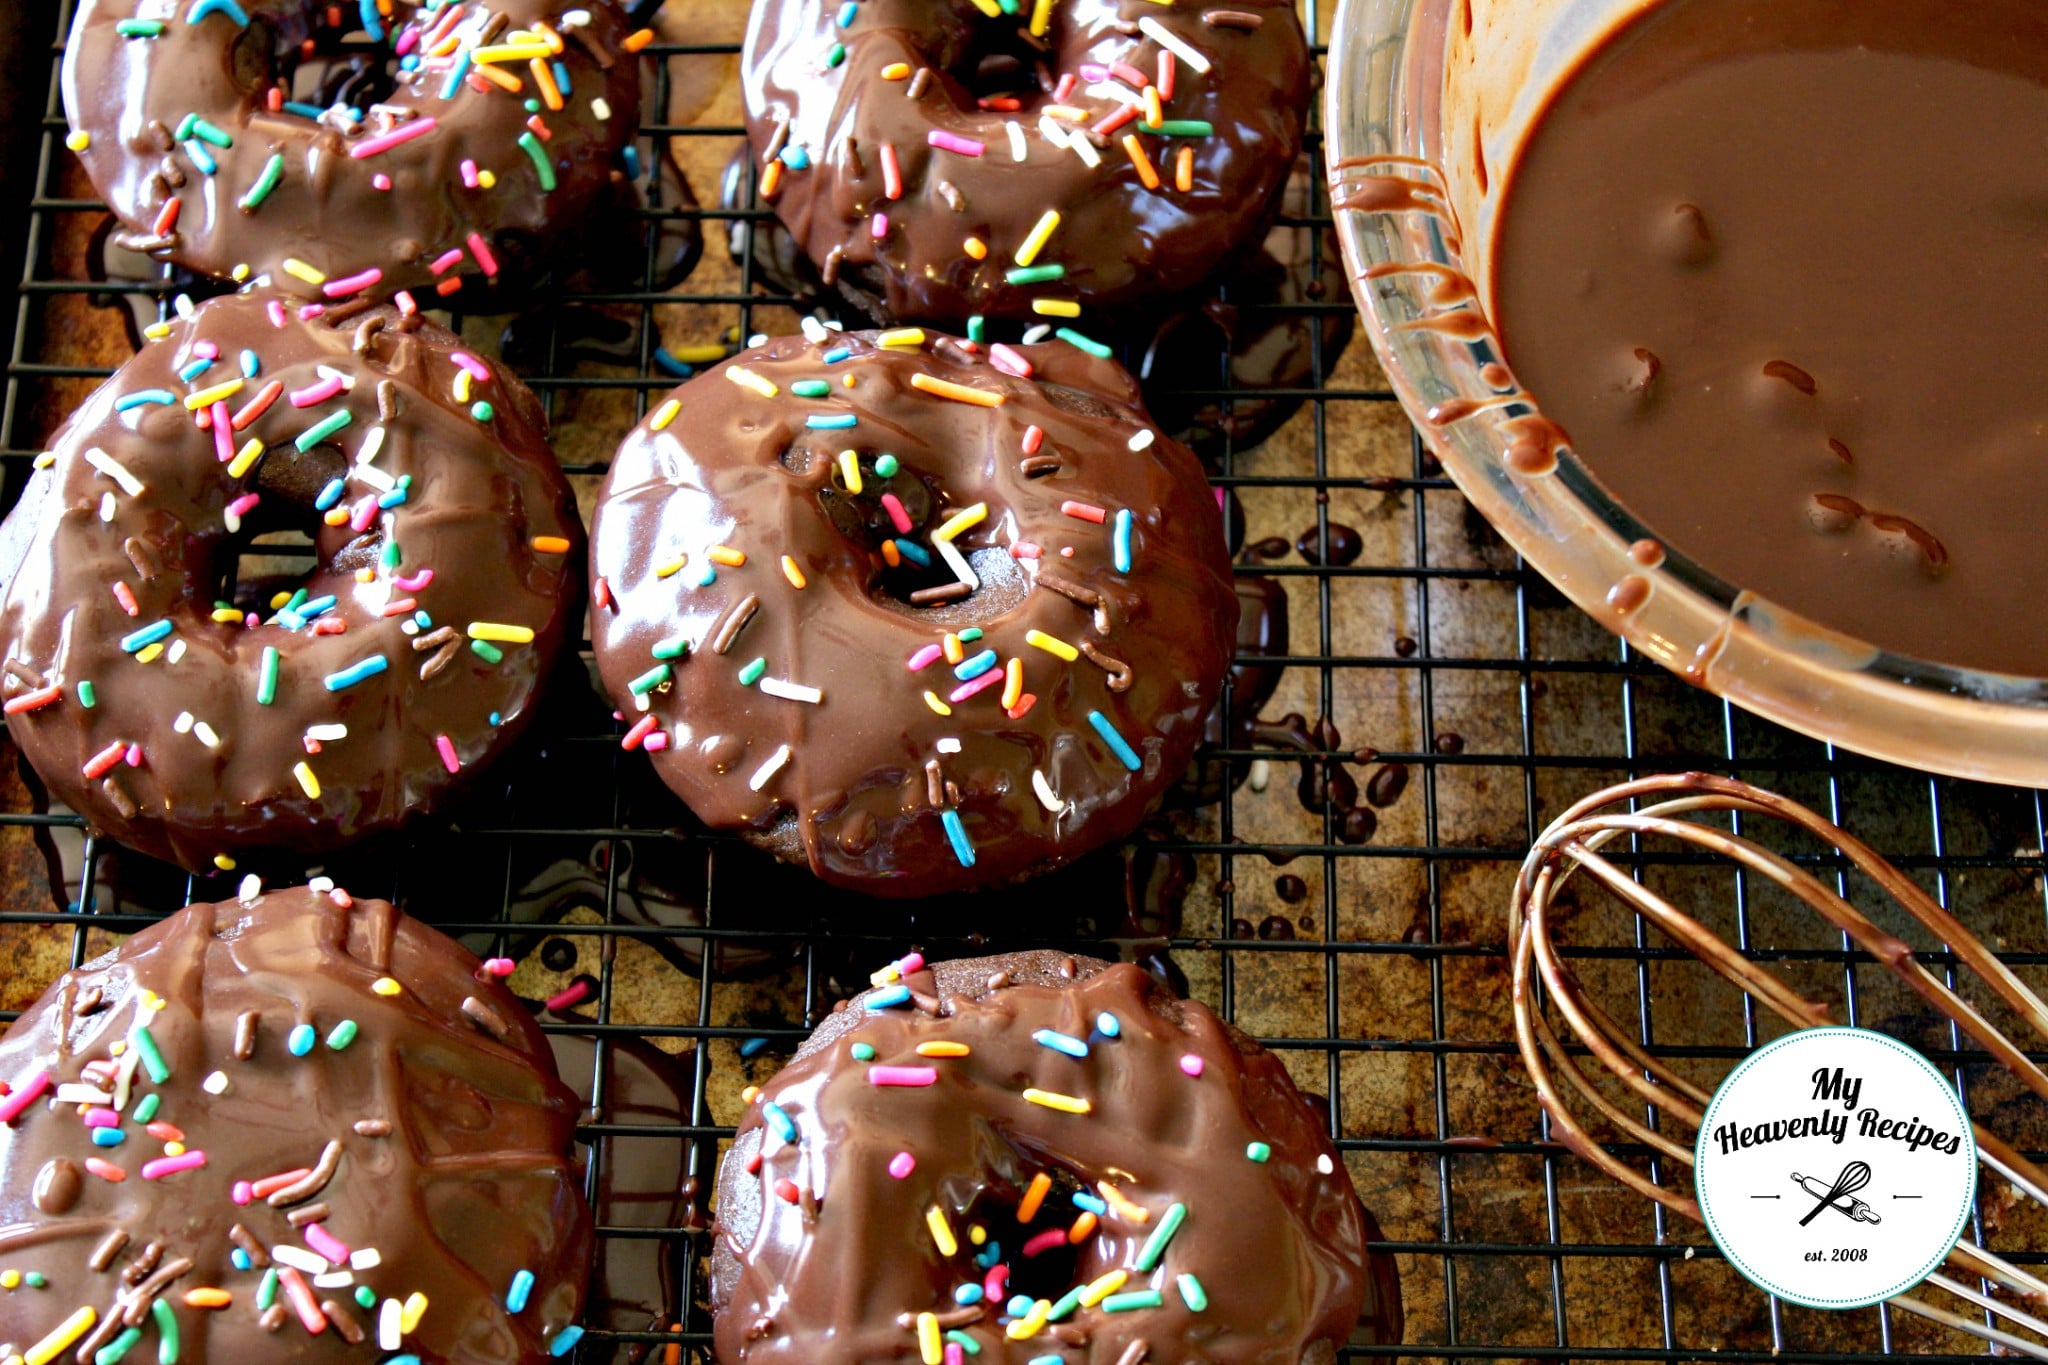 Baked Chocolate Frosted Donuts with Sprinkles